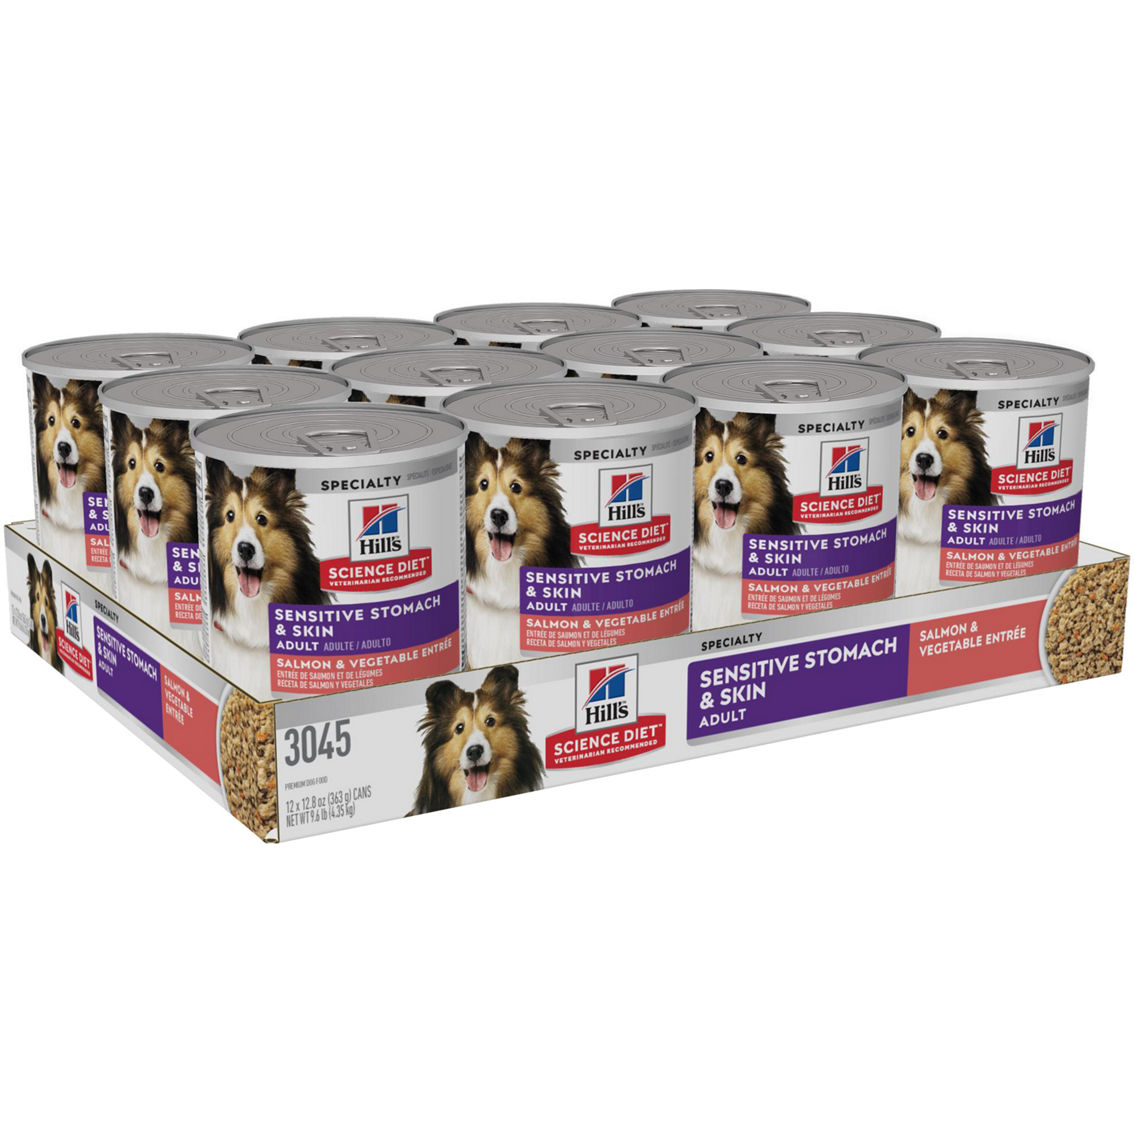 Hill's Adult Sensitive Stomach and Skin Salmon and Vegetable Entree Wet Dog Food - Image 2 of 2